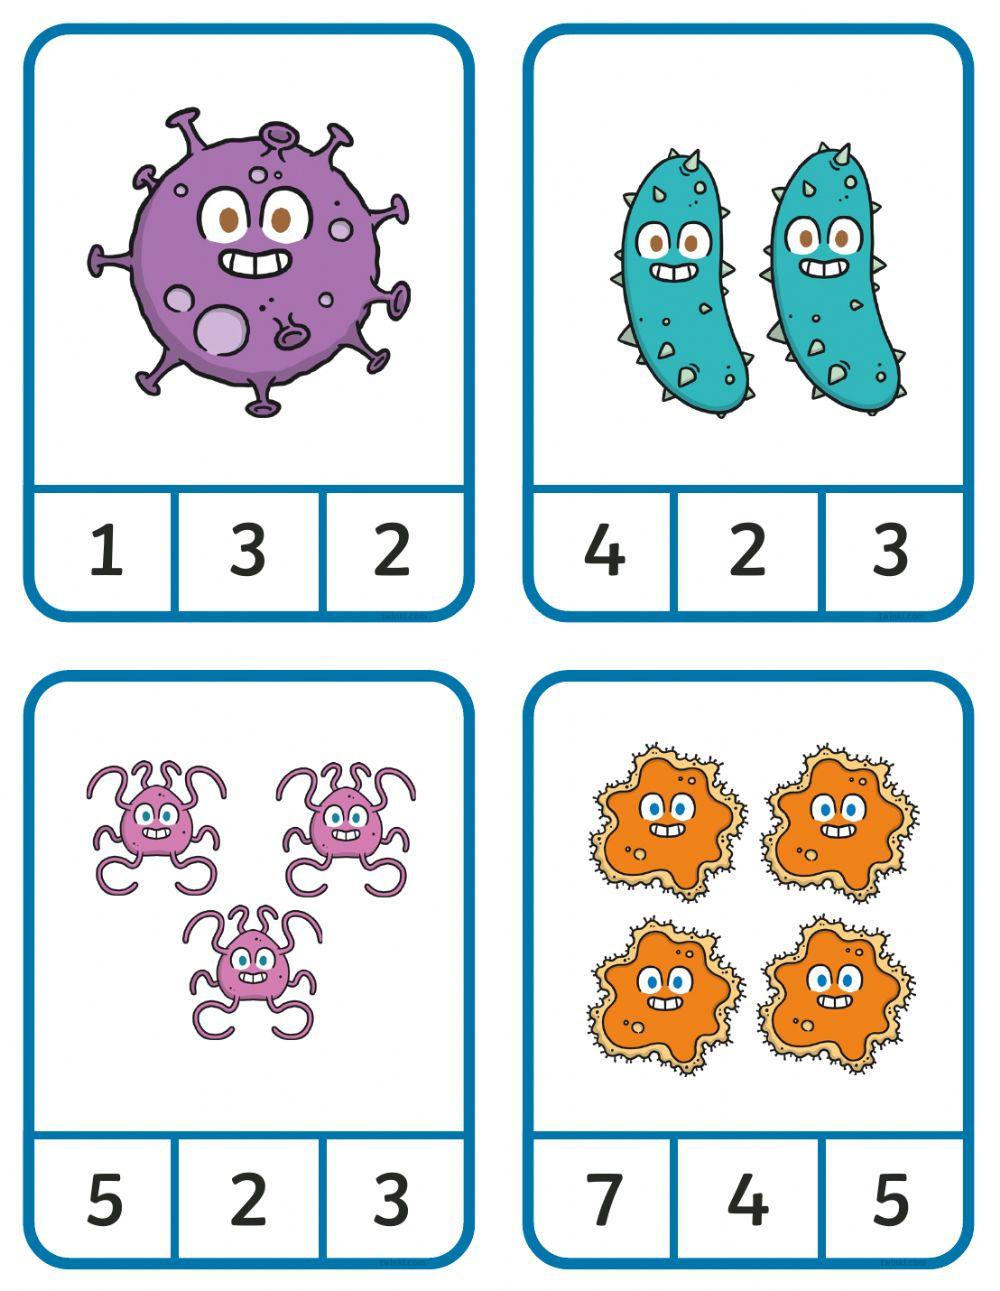 Counting germs